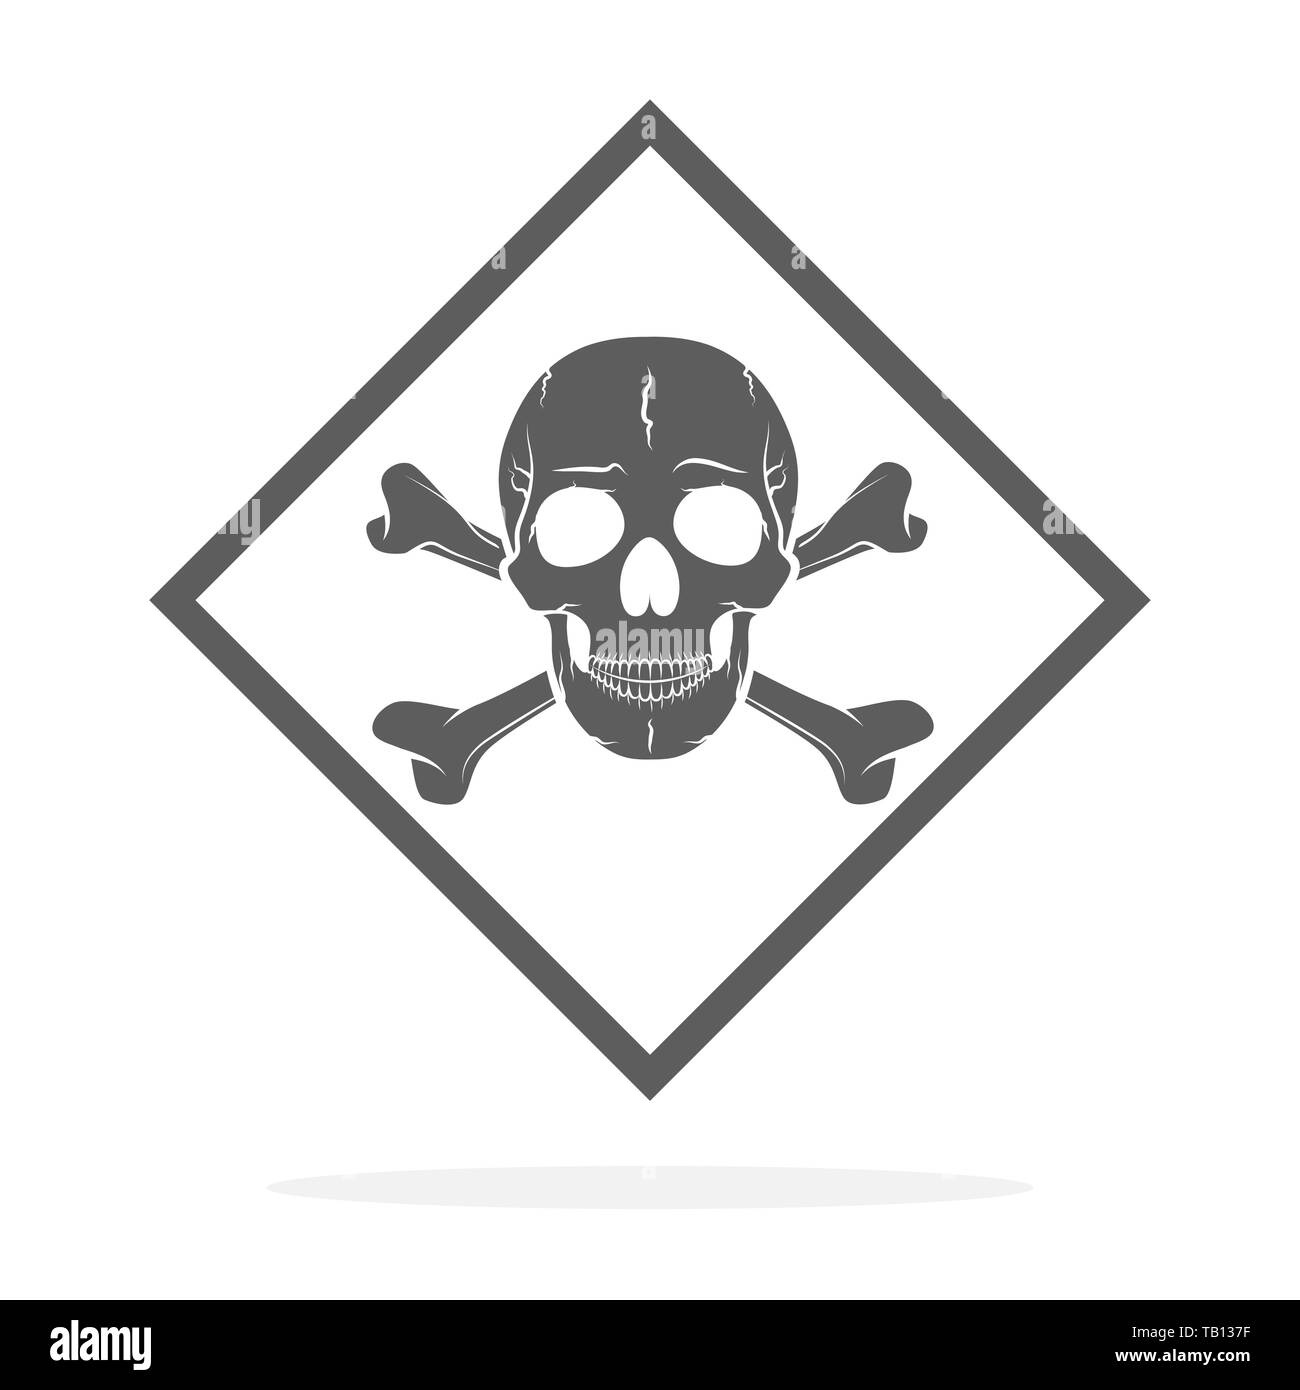 Danger abstract Black and White Stock Photos & Images - Alamy